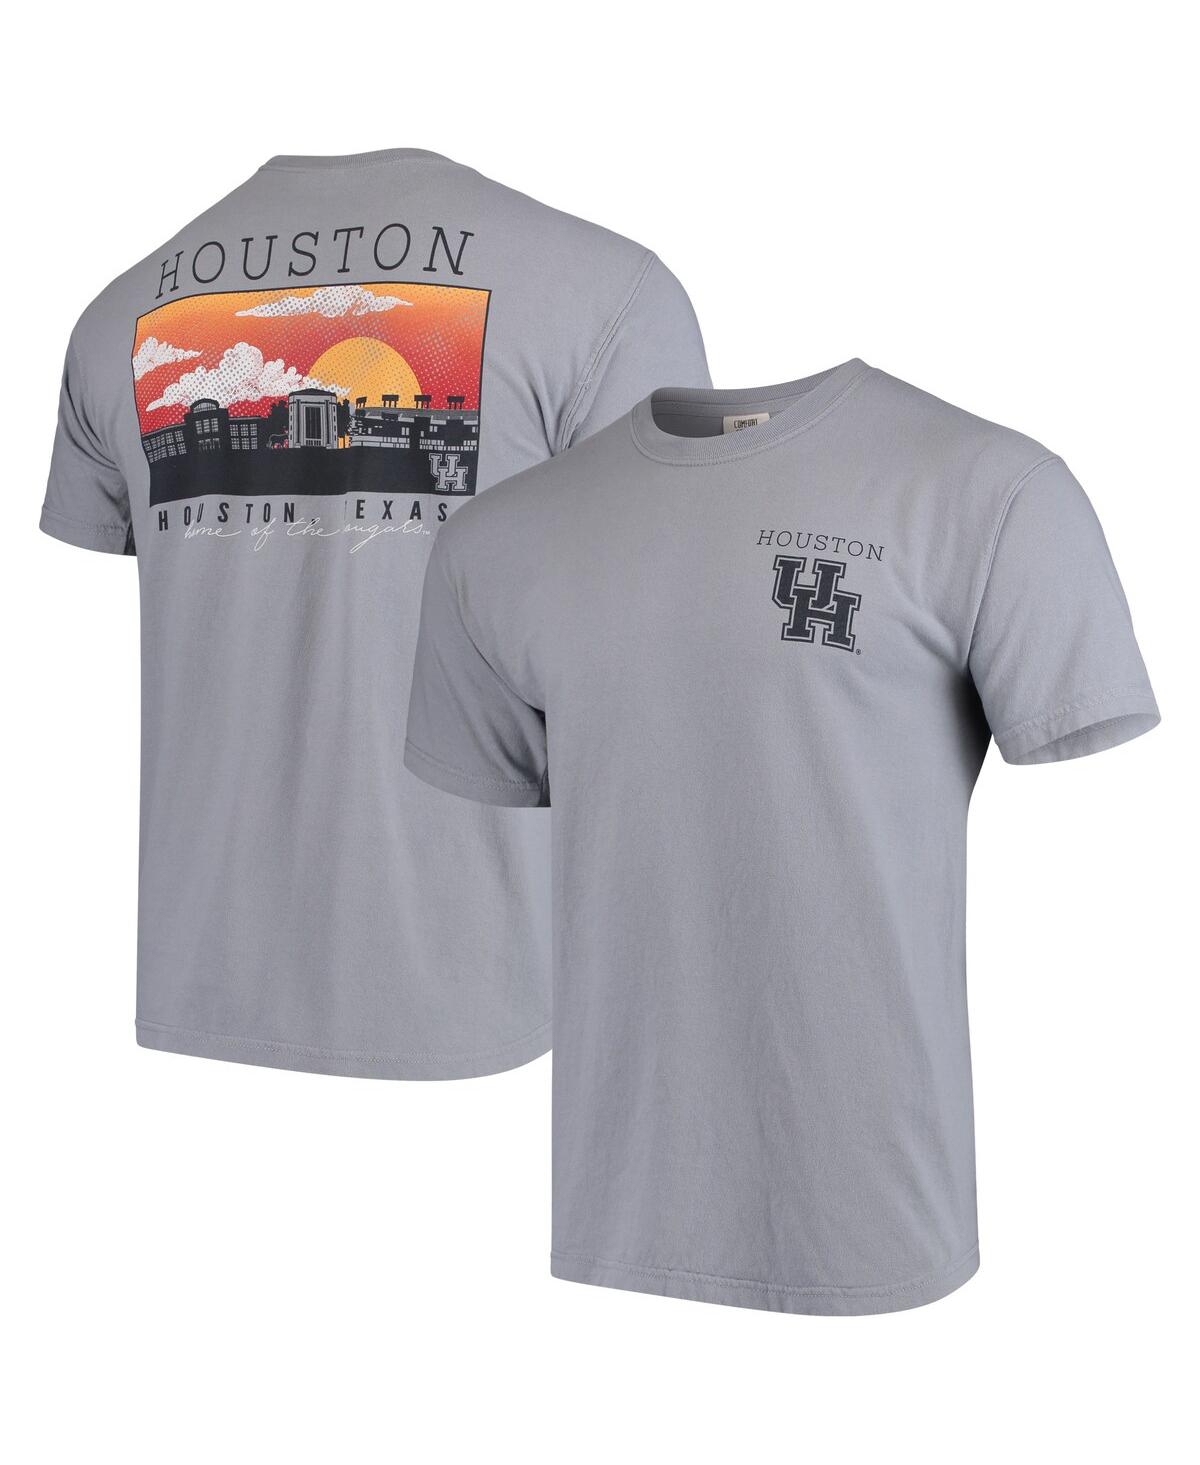 Men's Houston Cougars Comfort Colors Campus Scenery T-shirt - Gray - Gray